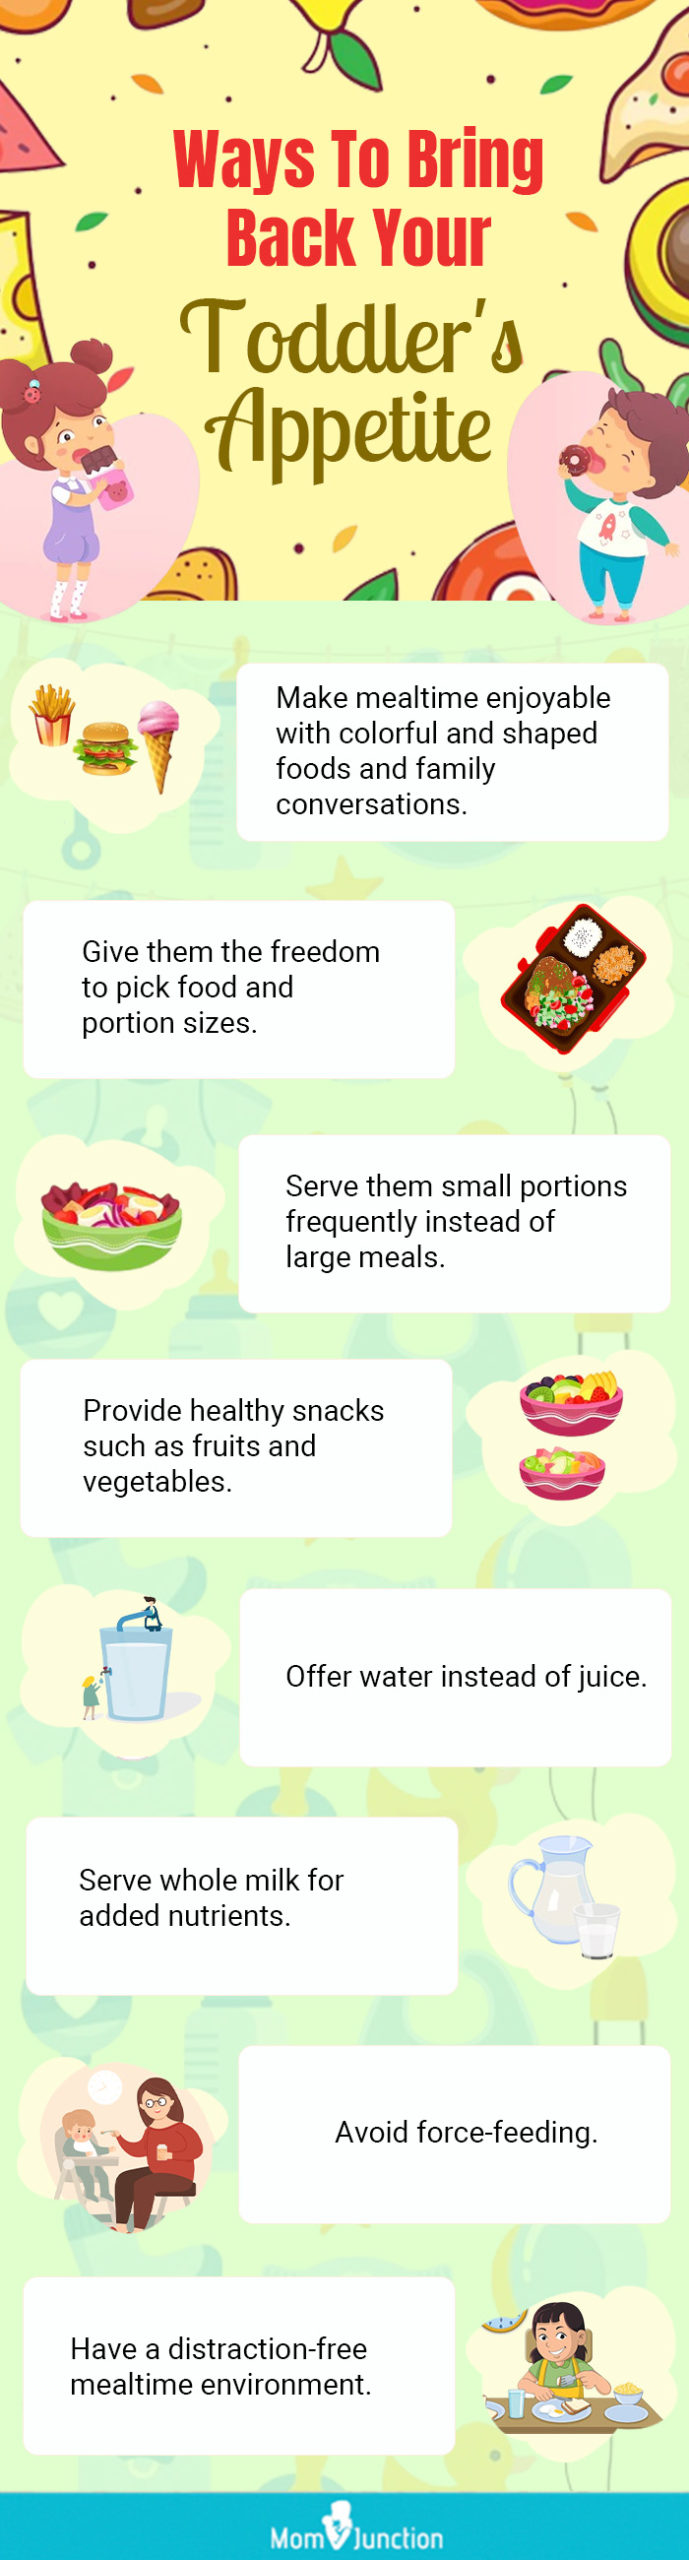 ways to bring back your toddler's appetite (infographic)